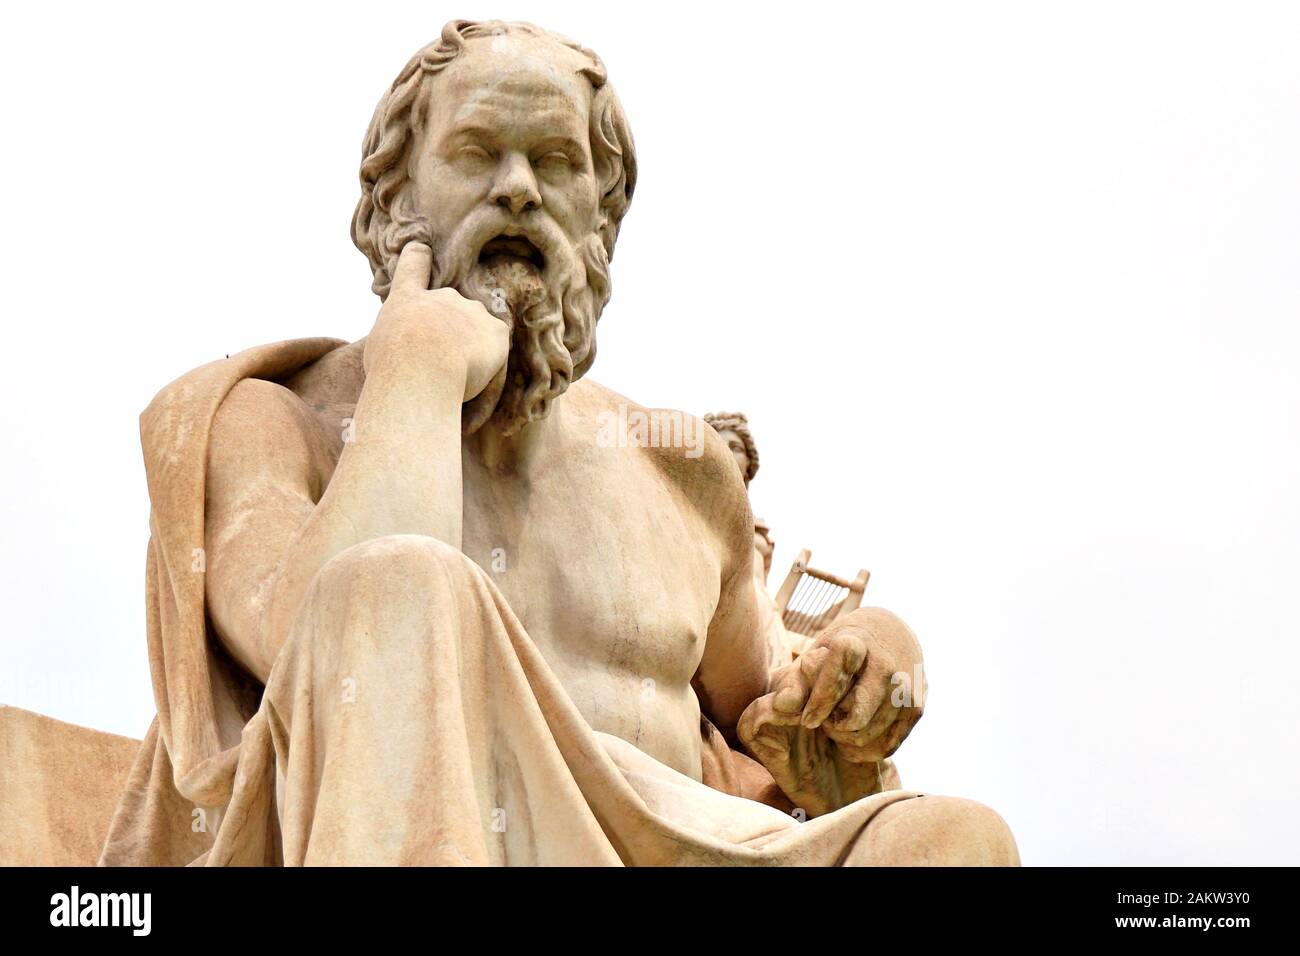 Athens, Greece - 21 August 2017: Statue by the greek philosopher Plato in The Academy of Athens Stock Photo